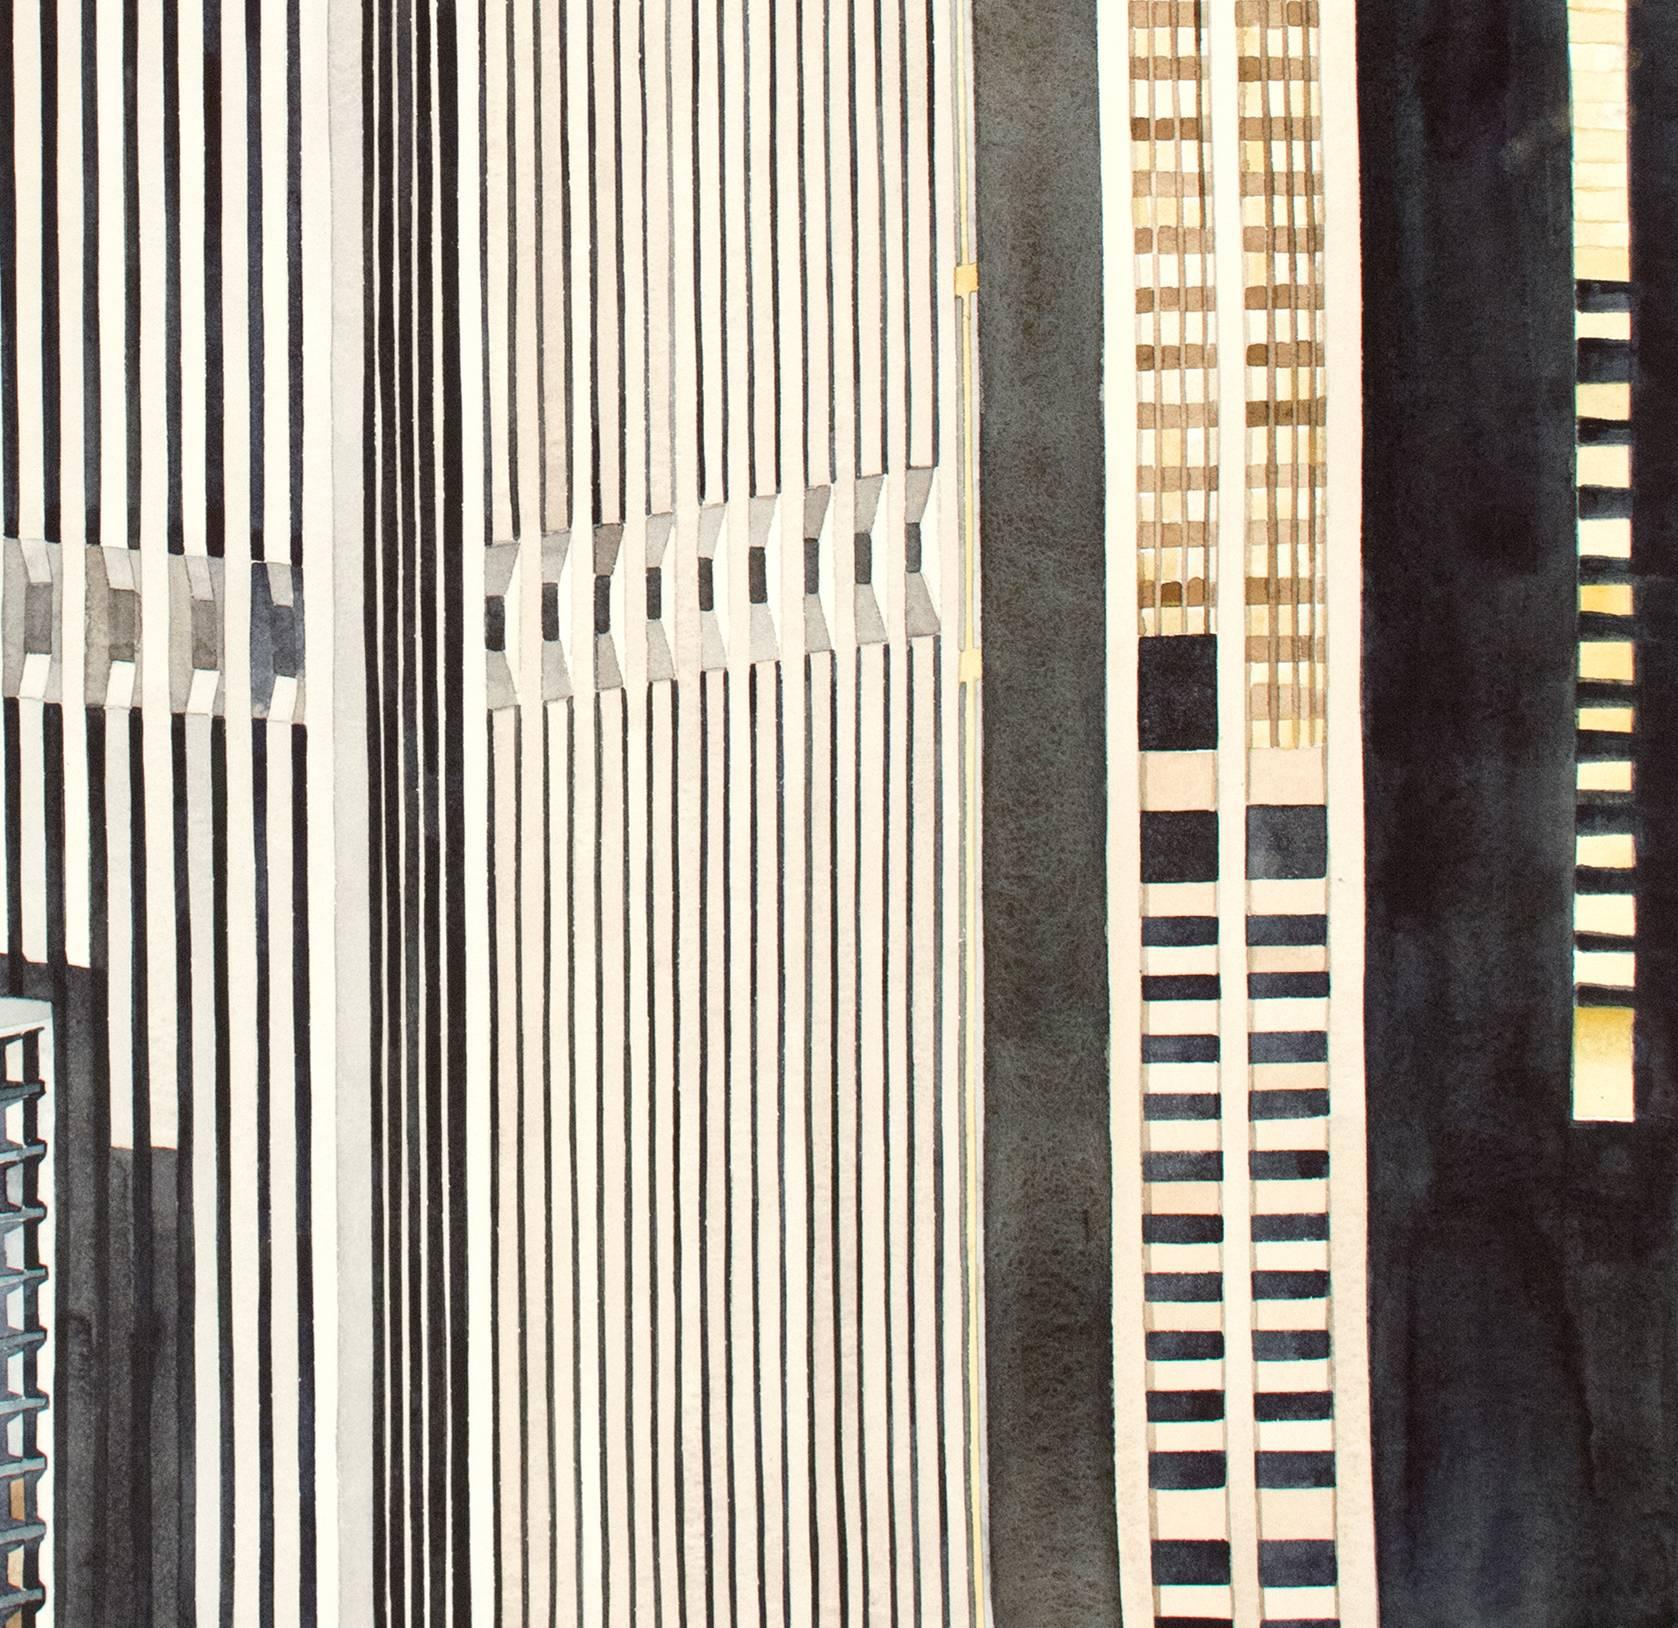 Lower Manhattan From 1200' - Art by Amy Park